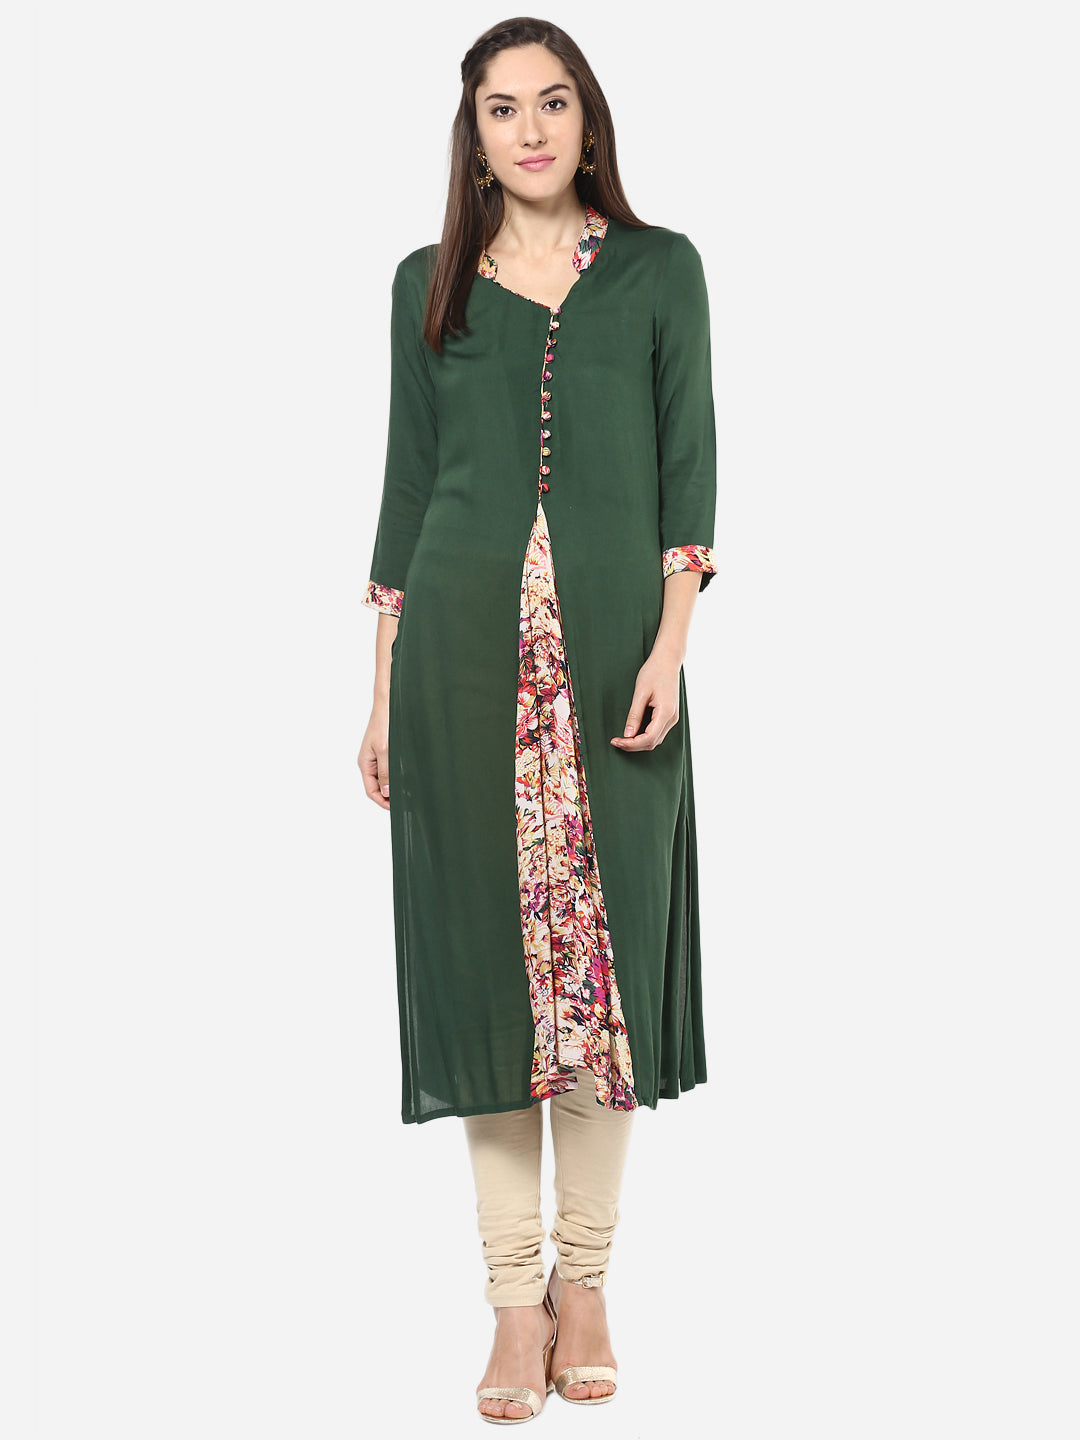 Women's Green and Multi colored Floral Pleated Kurti